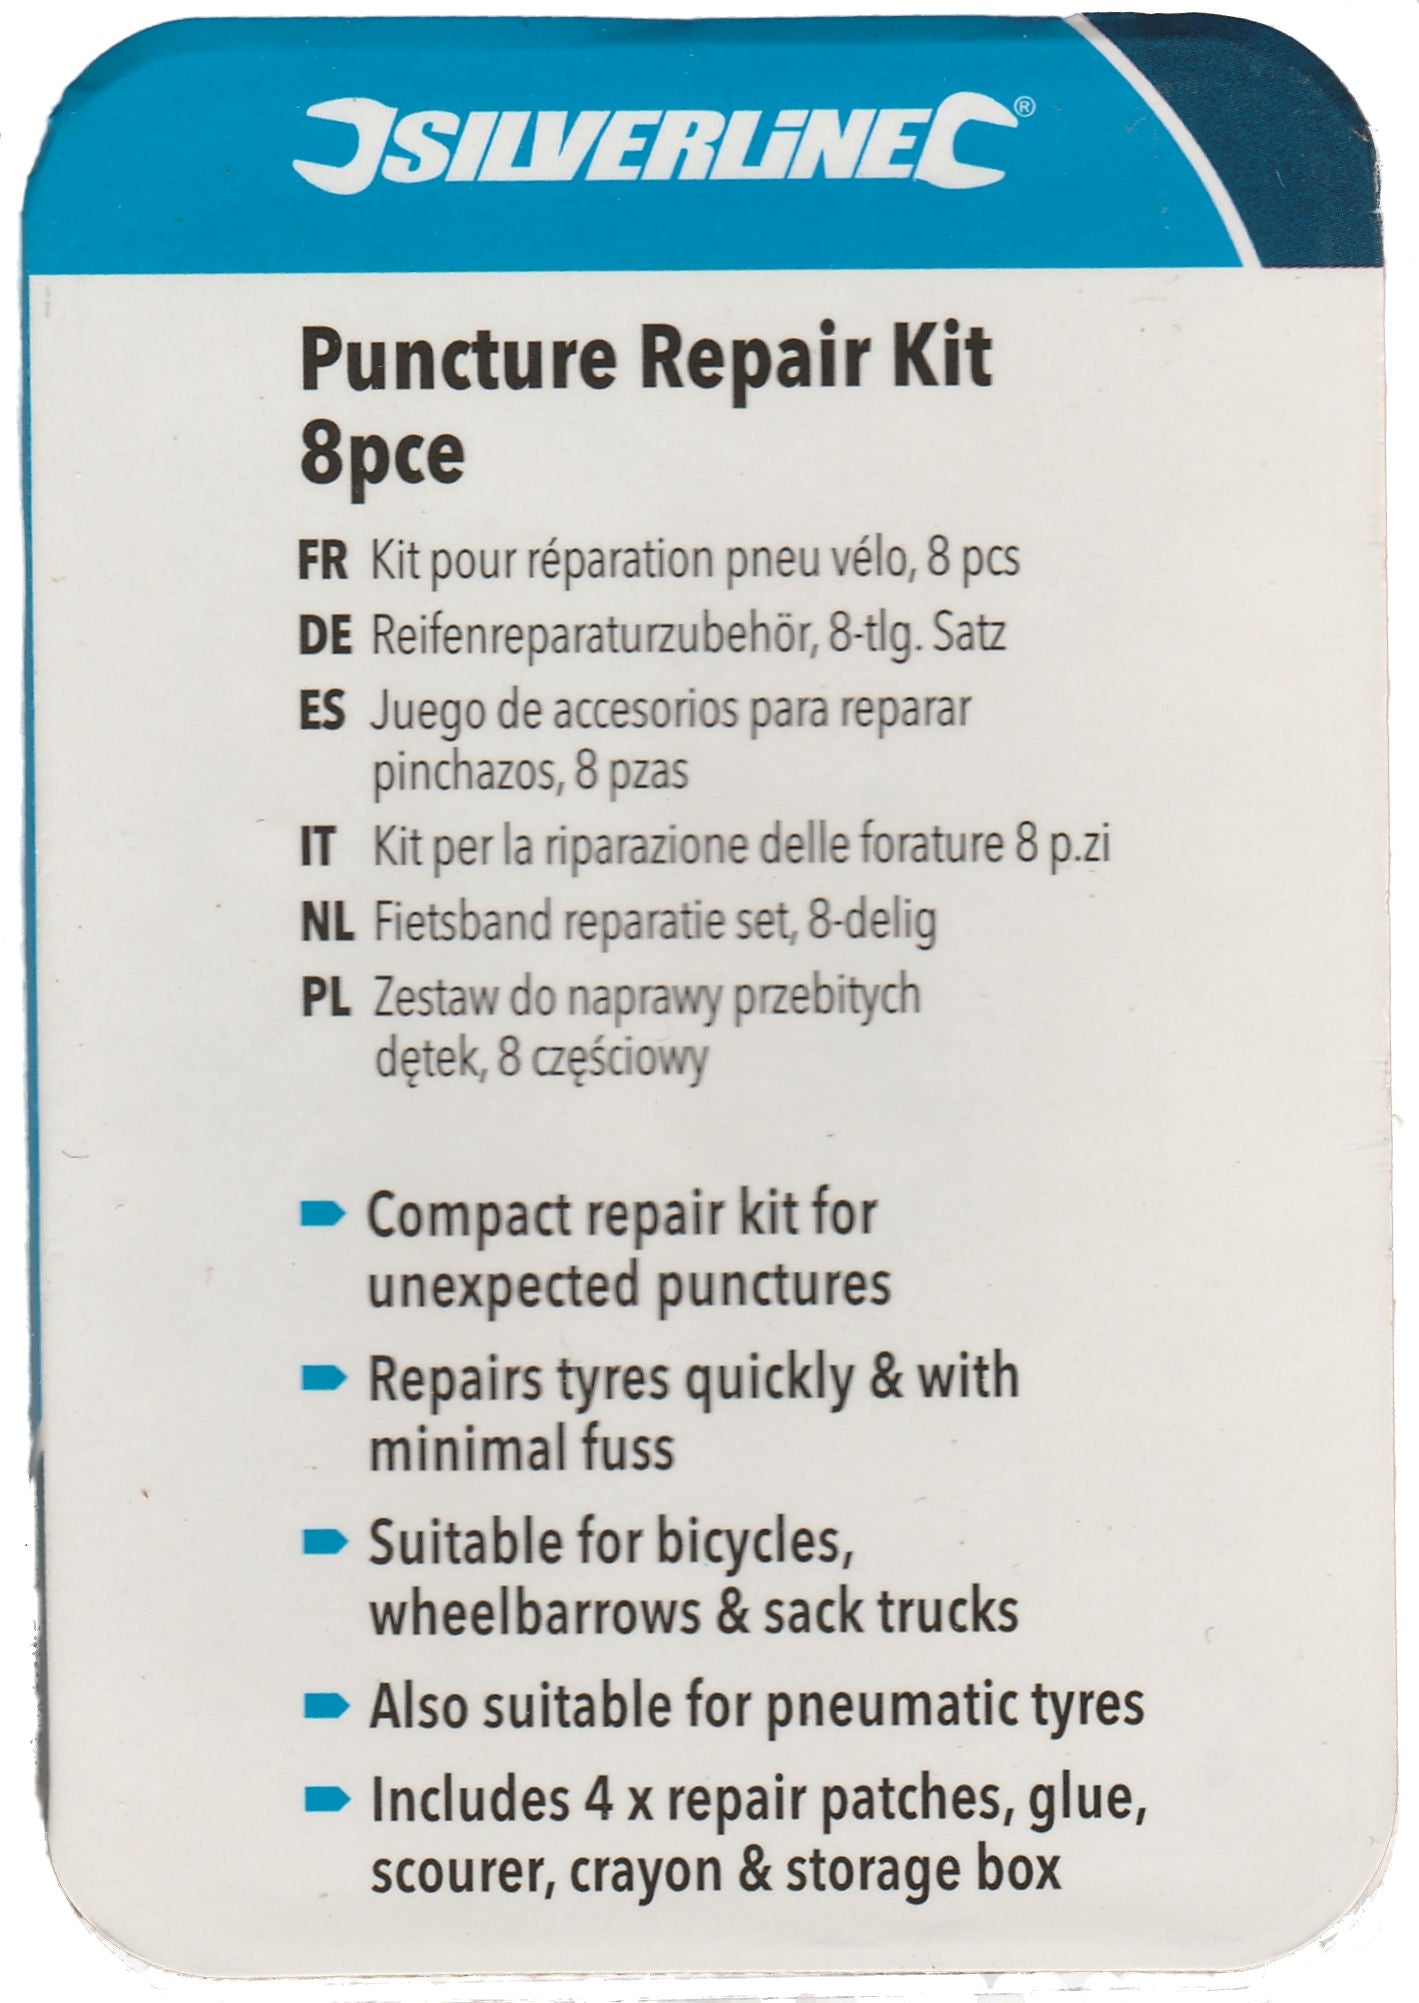 Small Puncture Repair kit a Great tool for emergency repairs Puncture Repair Kit Huggins Attic    [Huggins attic]